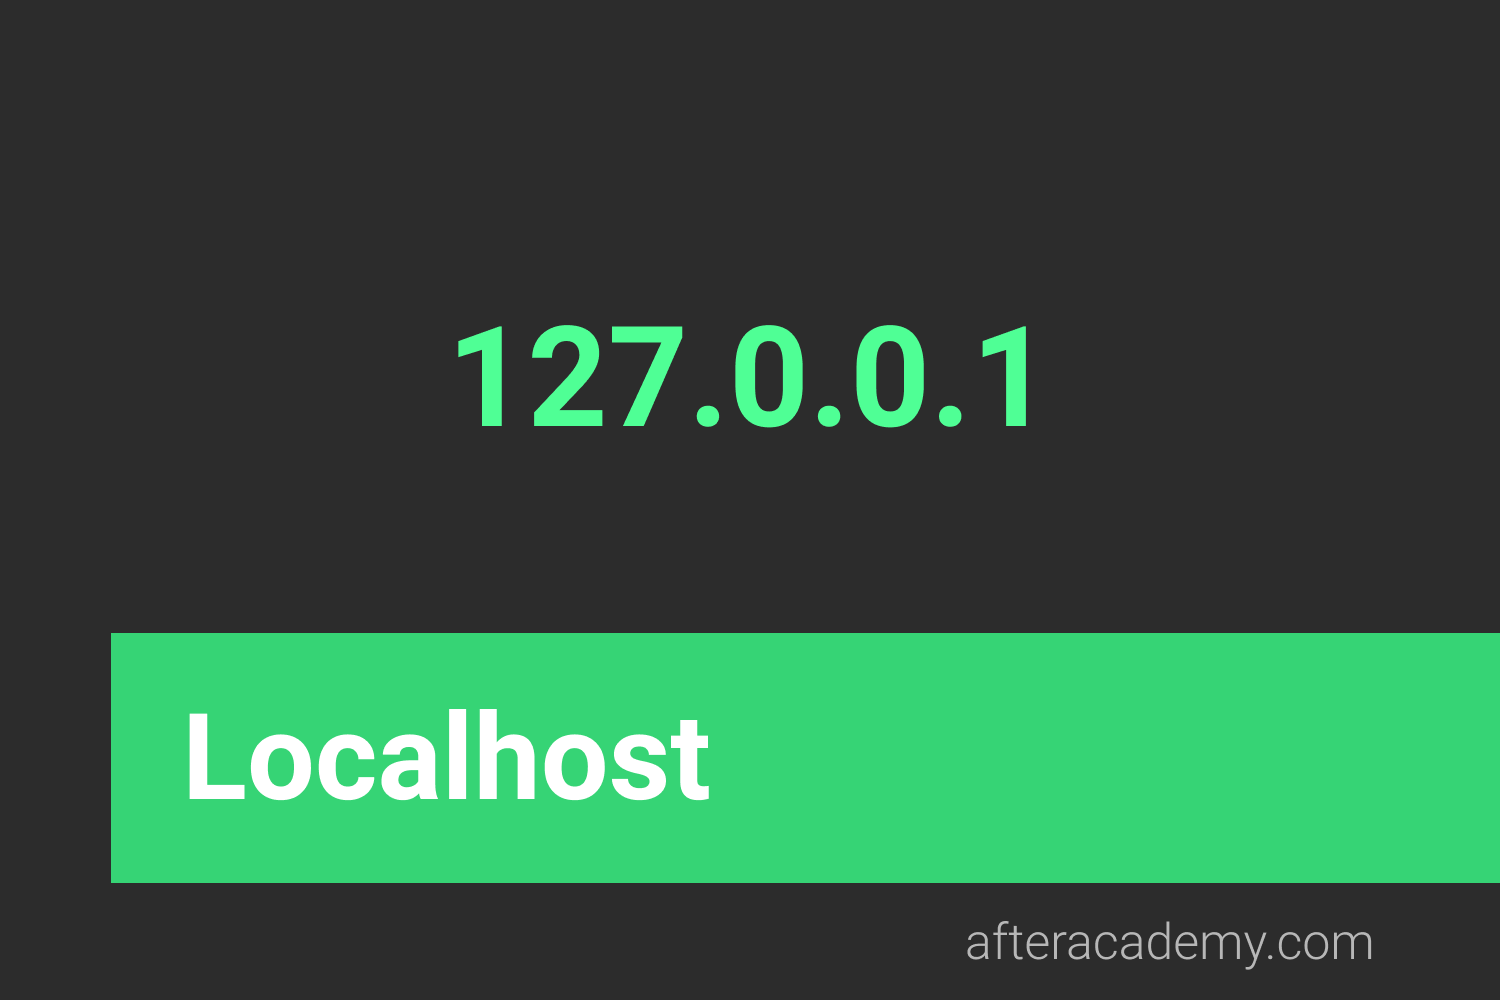 What is a localhost?